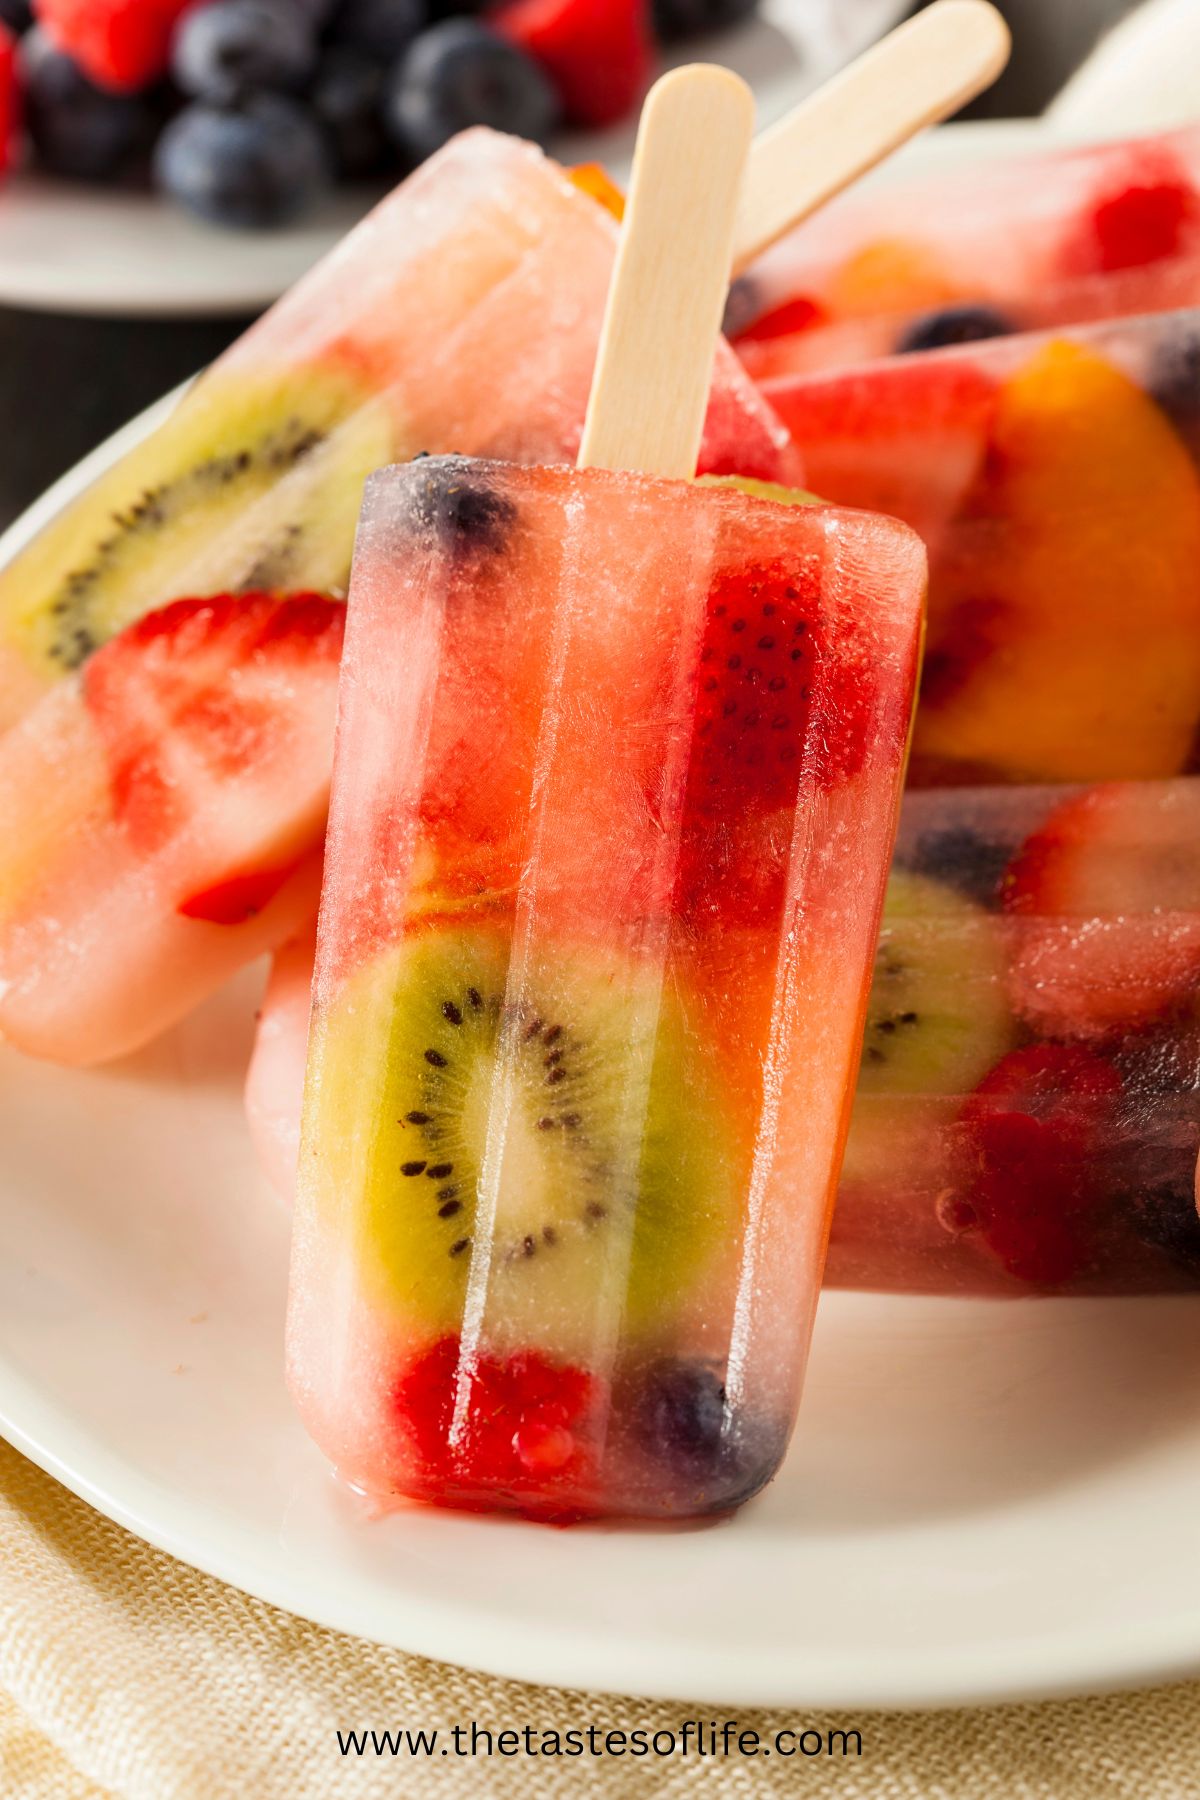 How to Make Healthy Fruit Popsicles with Real, Fresh Fruit